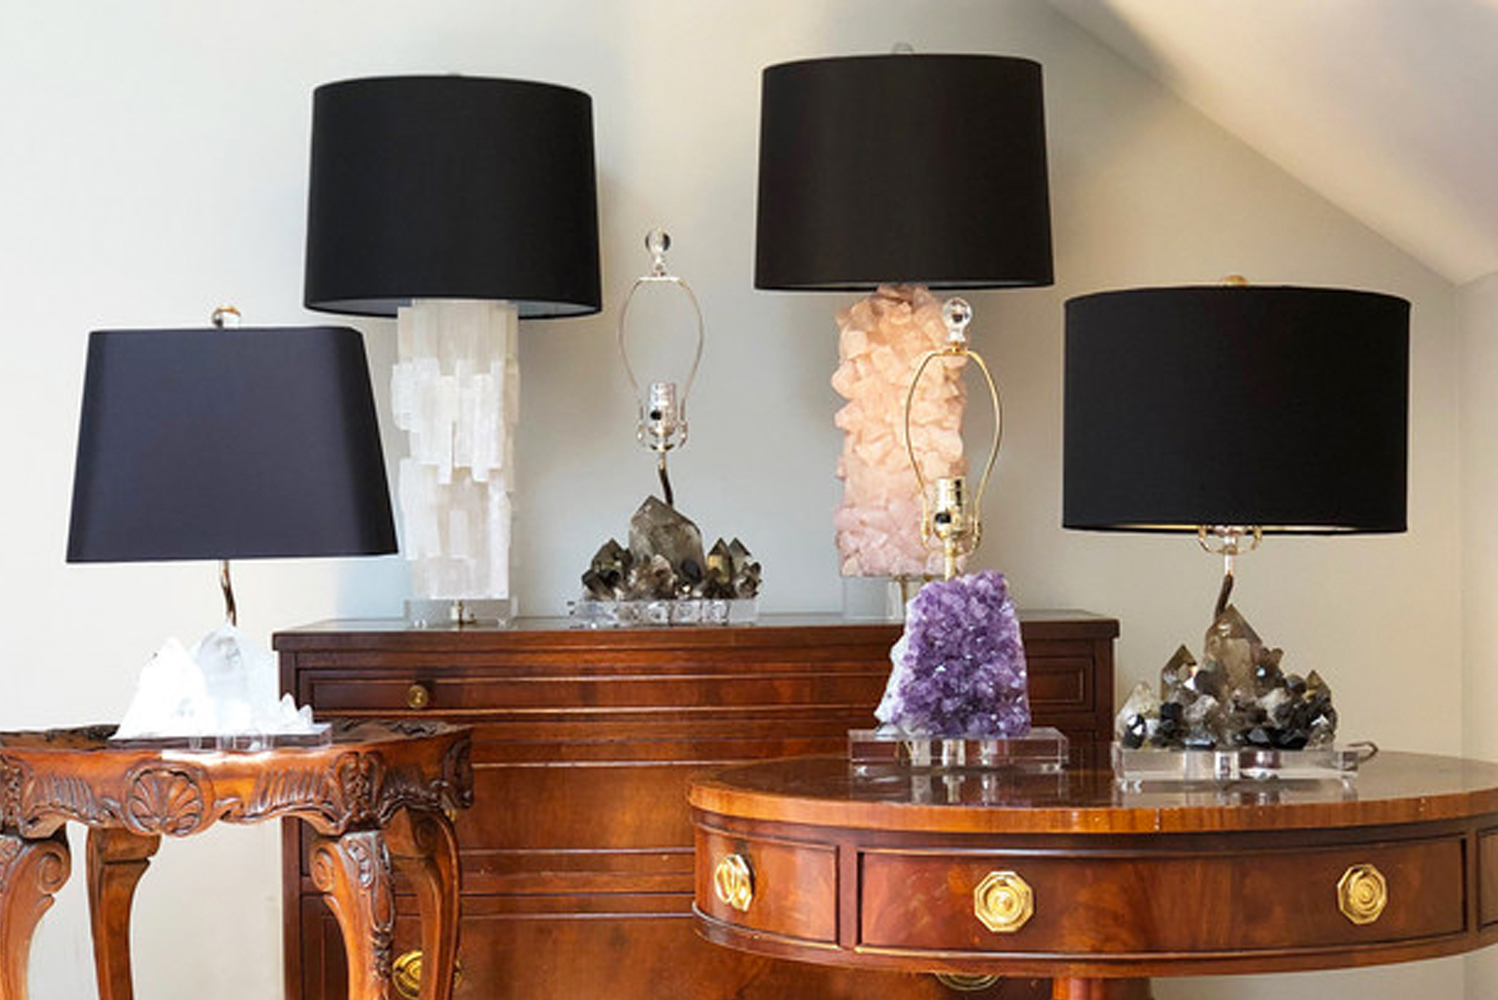 Designed by Oneka Benn Schwartz each table lamp was handcrafted by the designer herself 